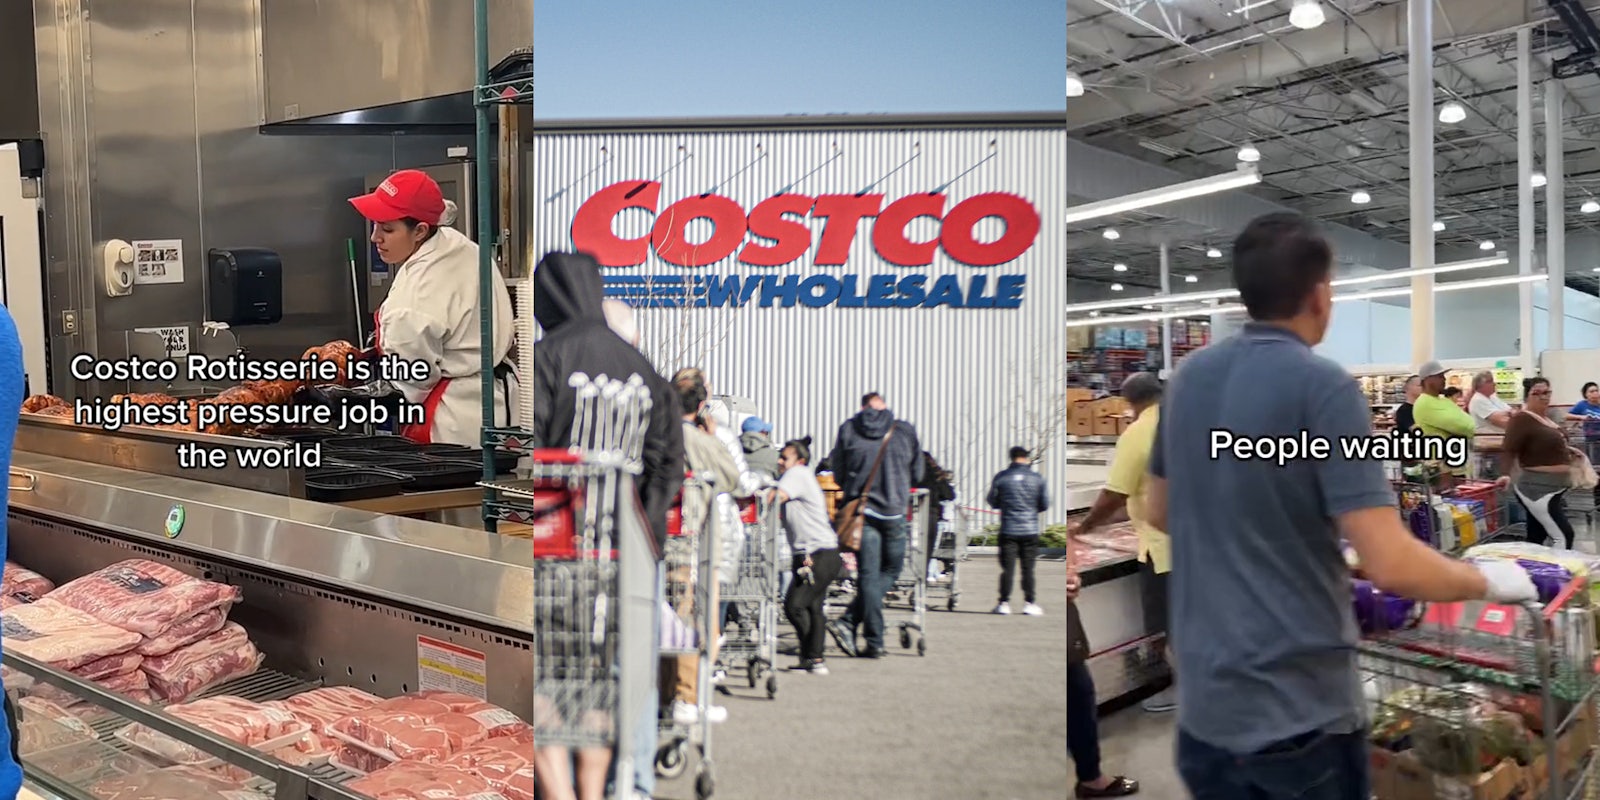 Costco Rotisserie worker with caption 'Costco Rotisserie is the highest pressure job in the world' (l) Costco building with sign and customers lined up (c) Costco interior with customers with caption 'People waiting' (r)